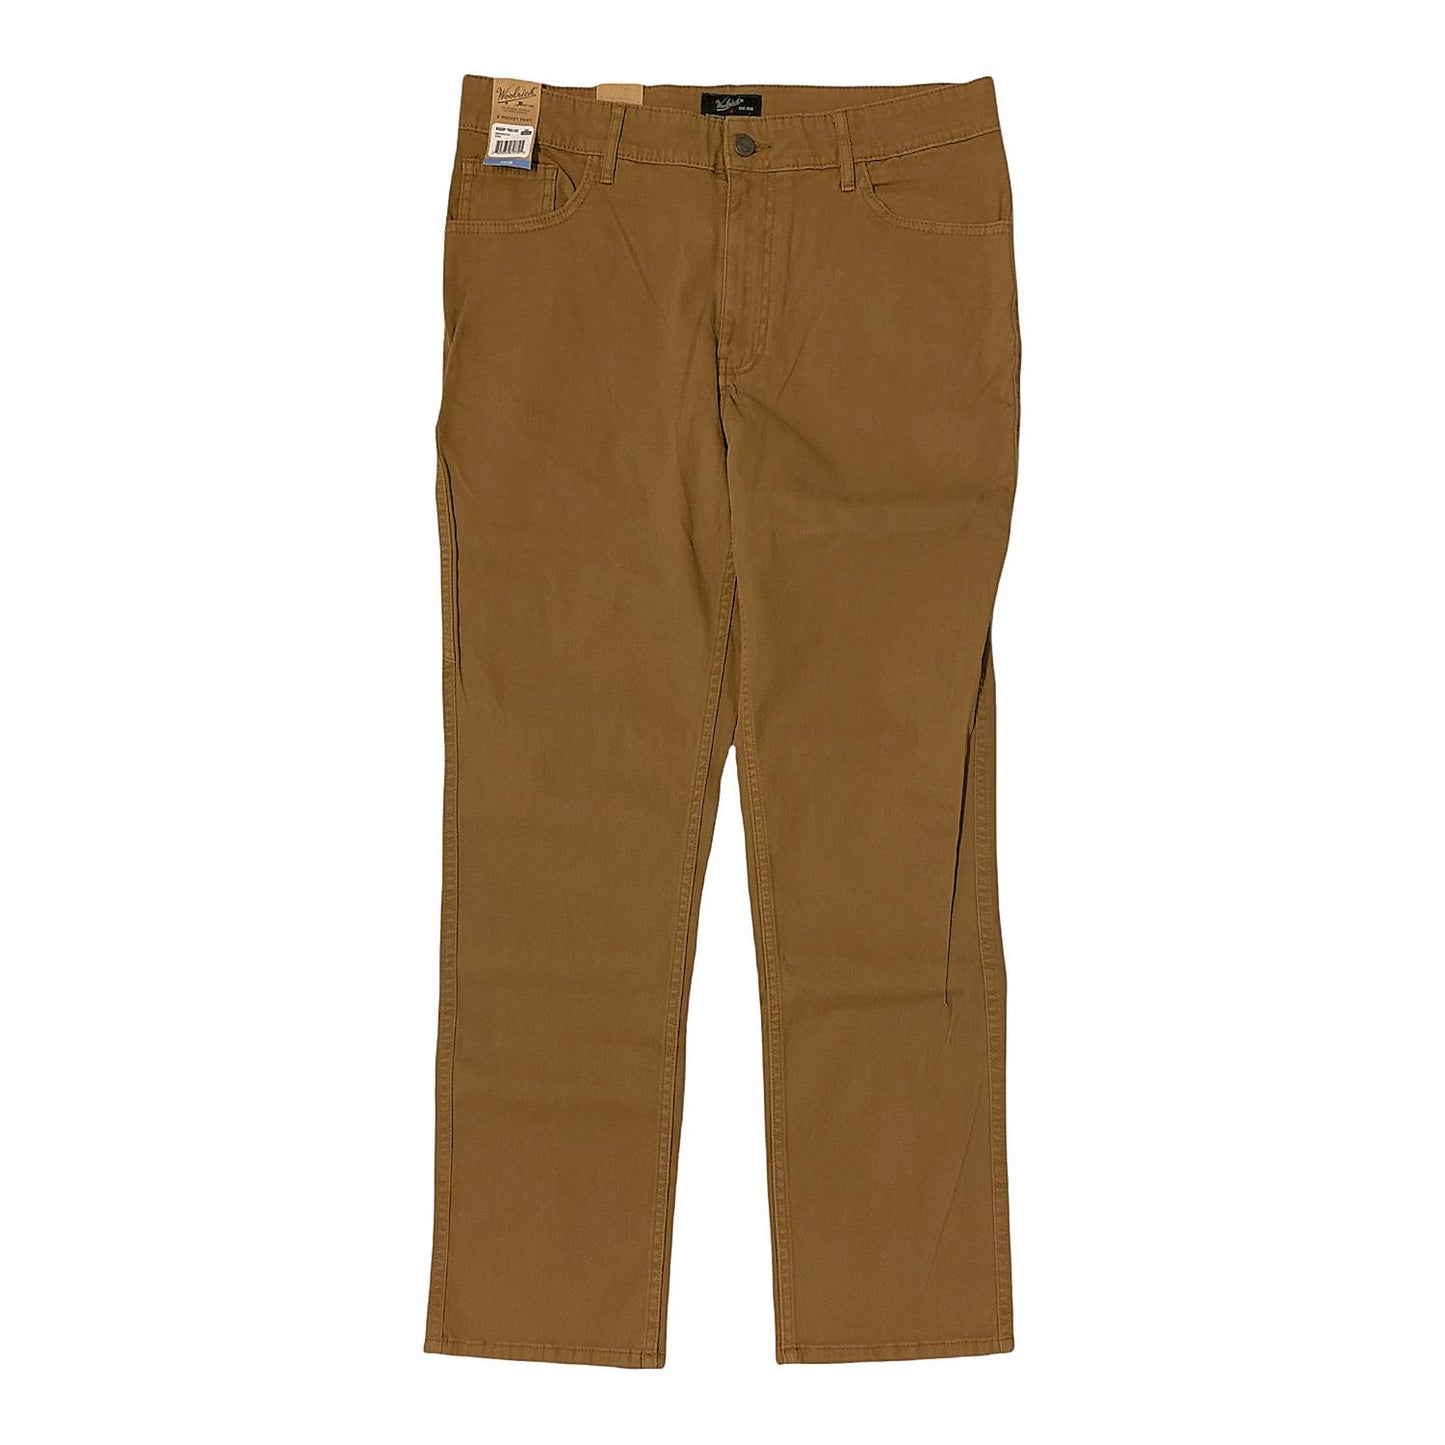 Woolrich Men's Straight Fit Stretch Fabric 5 Pocket Utility Pants